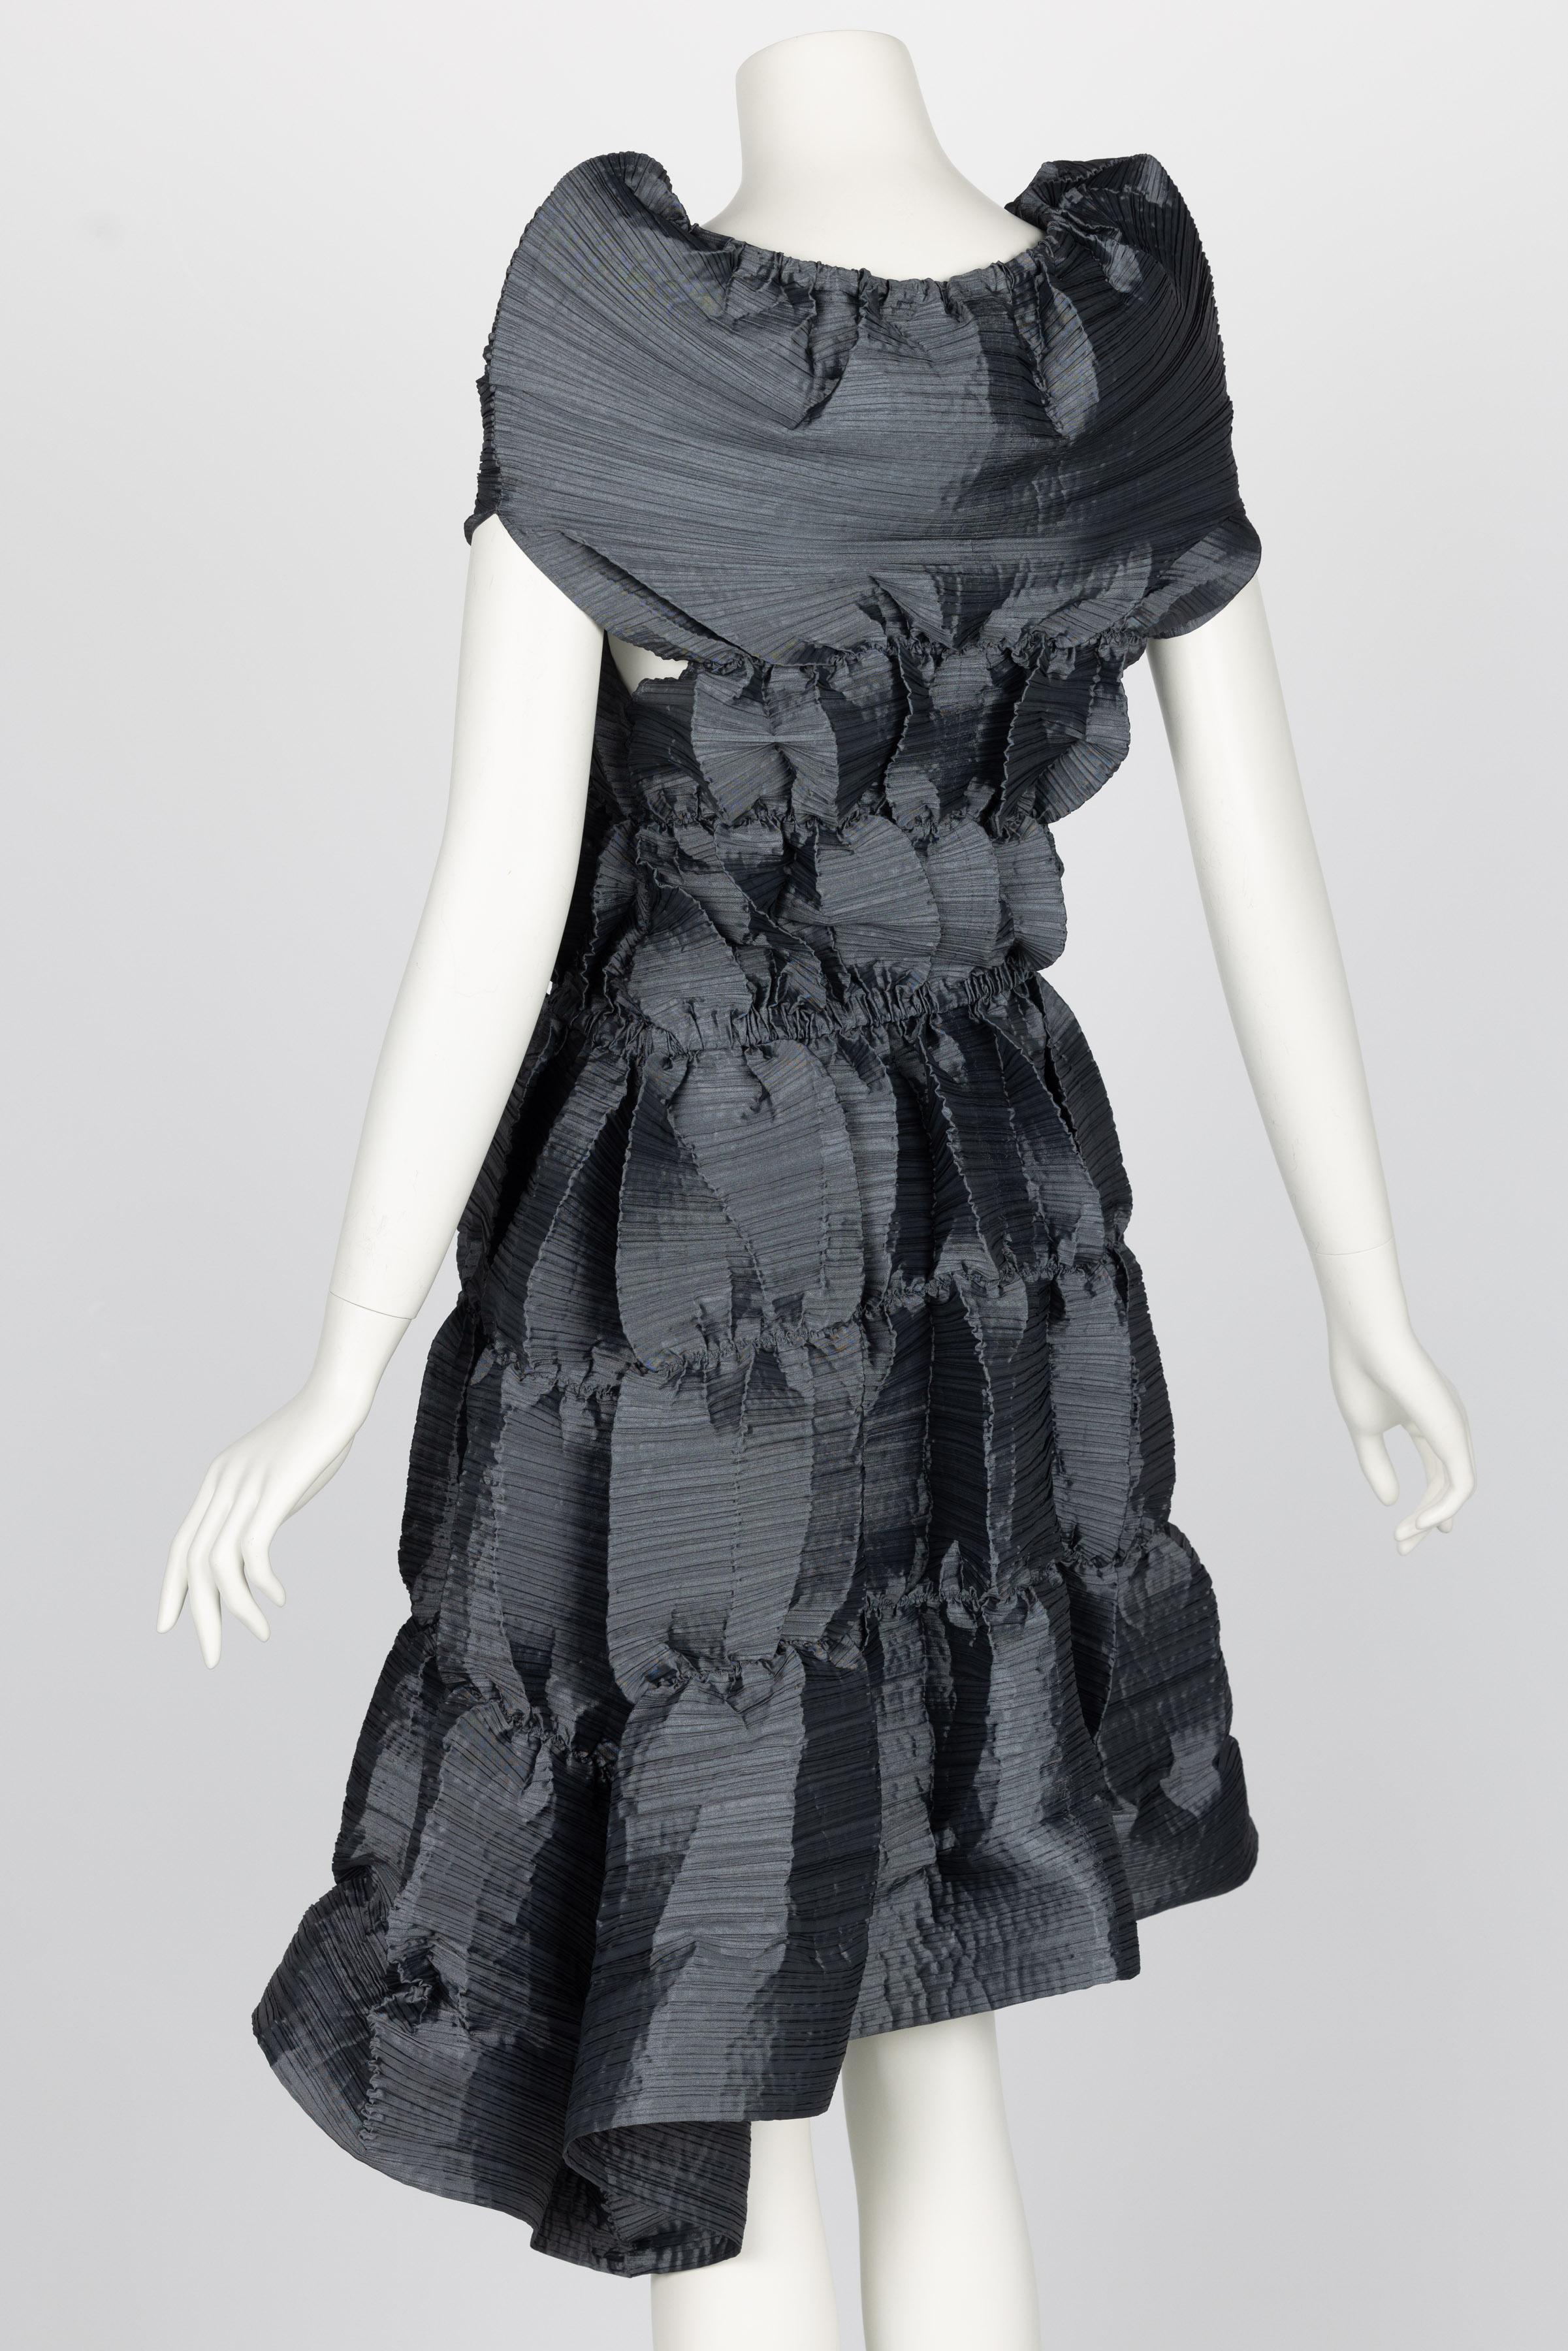 Issey Miyake Fête Silver Grey Pleats Midi Dress, Spring 2008 In Excellent Condition For Sale In Boca Raton, FL